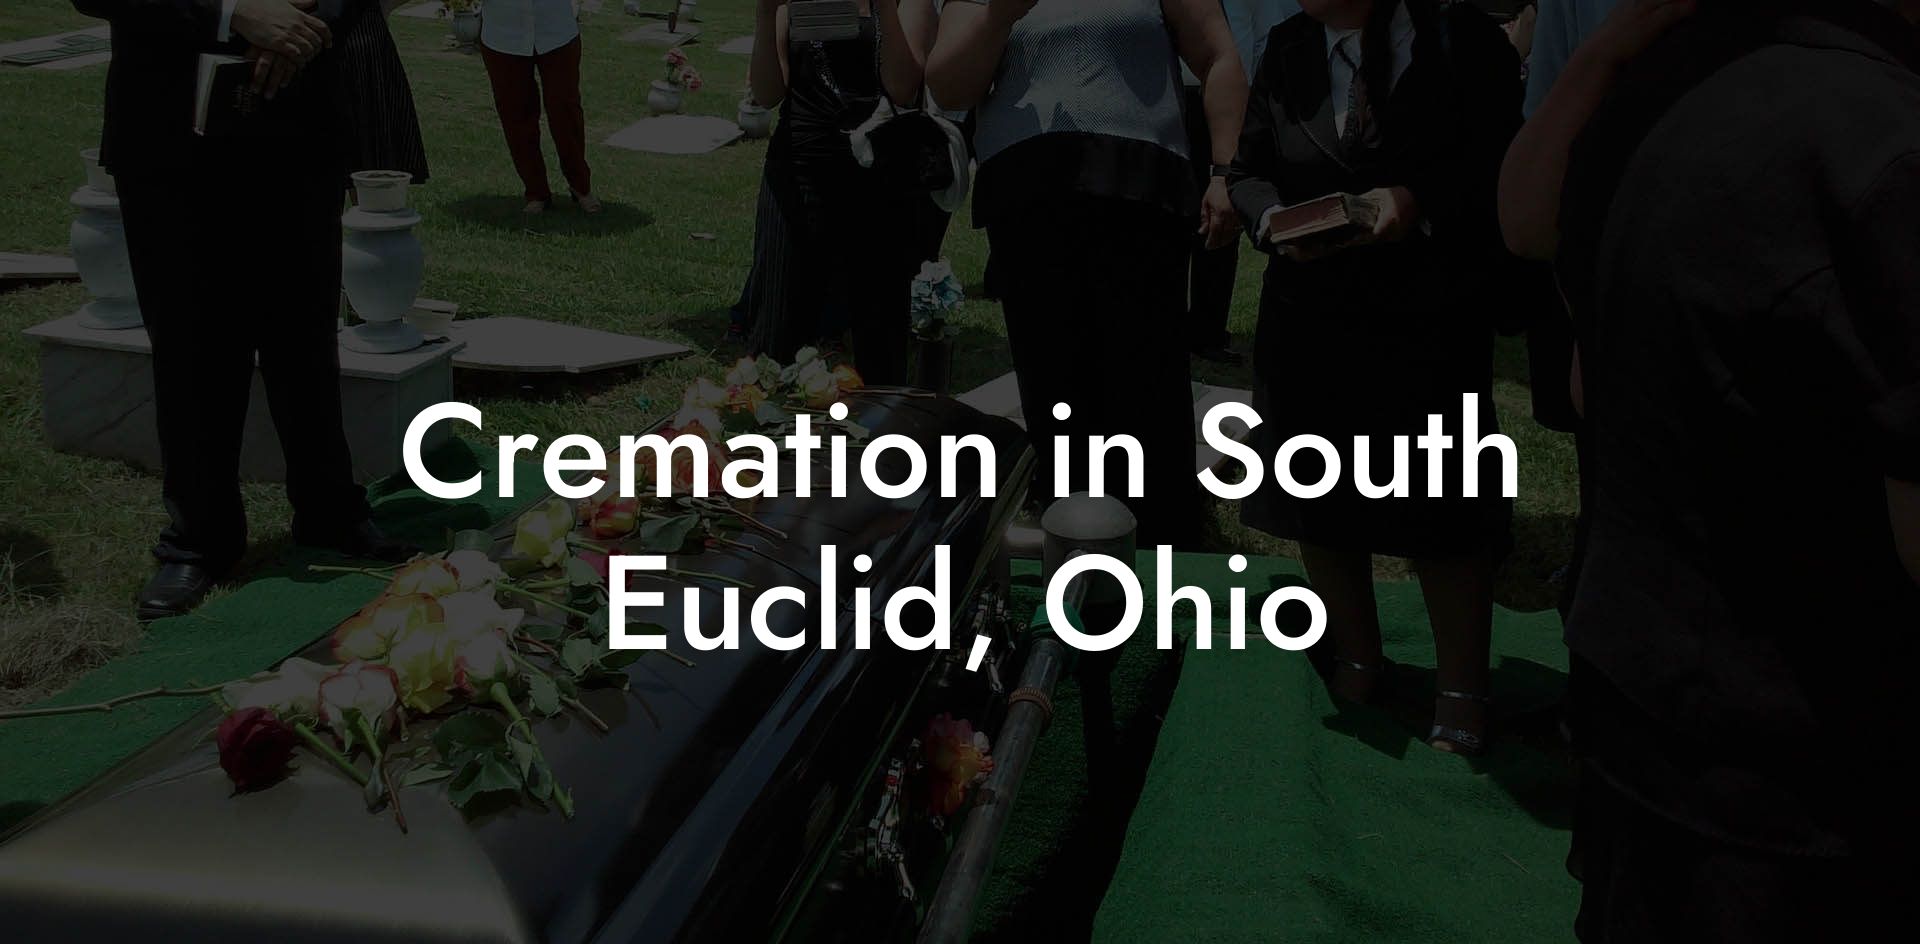 Cremation in South Euclid, Ohio